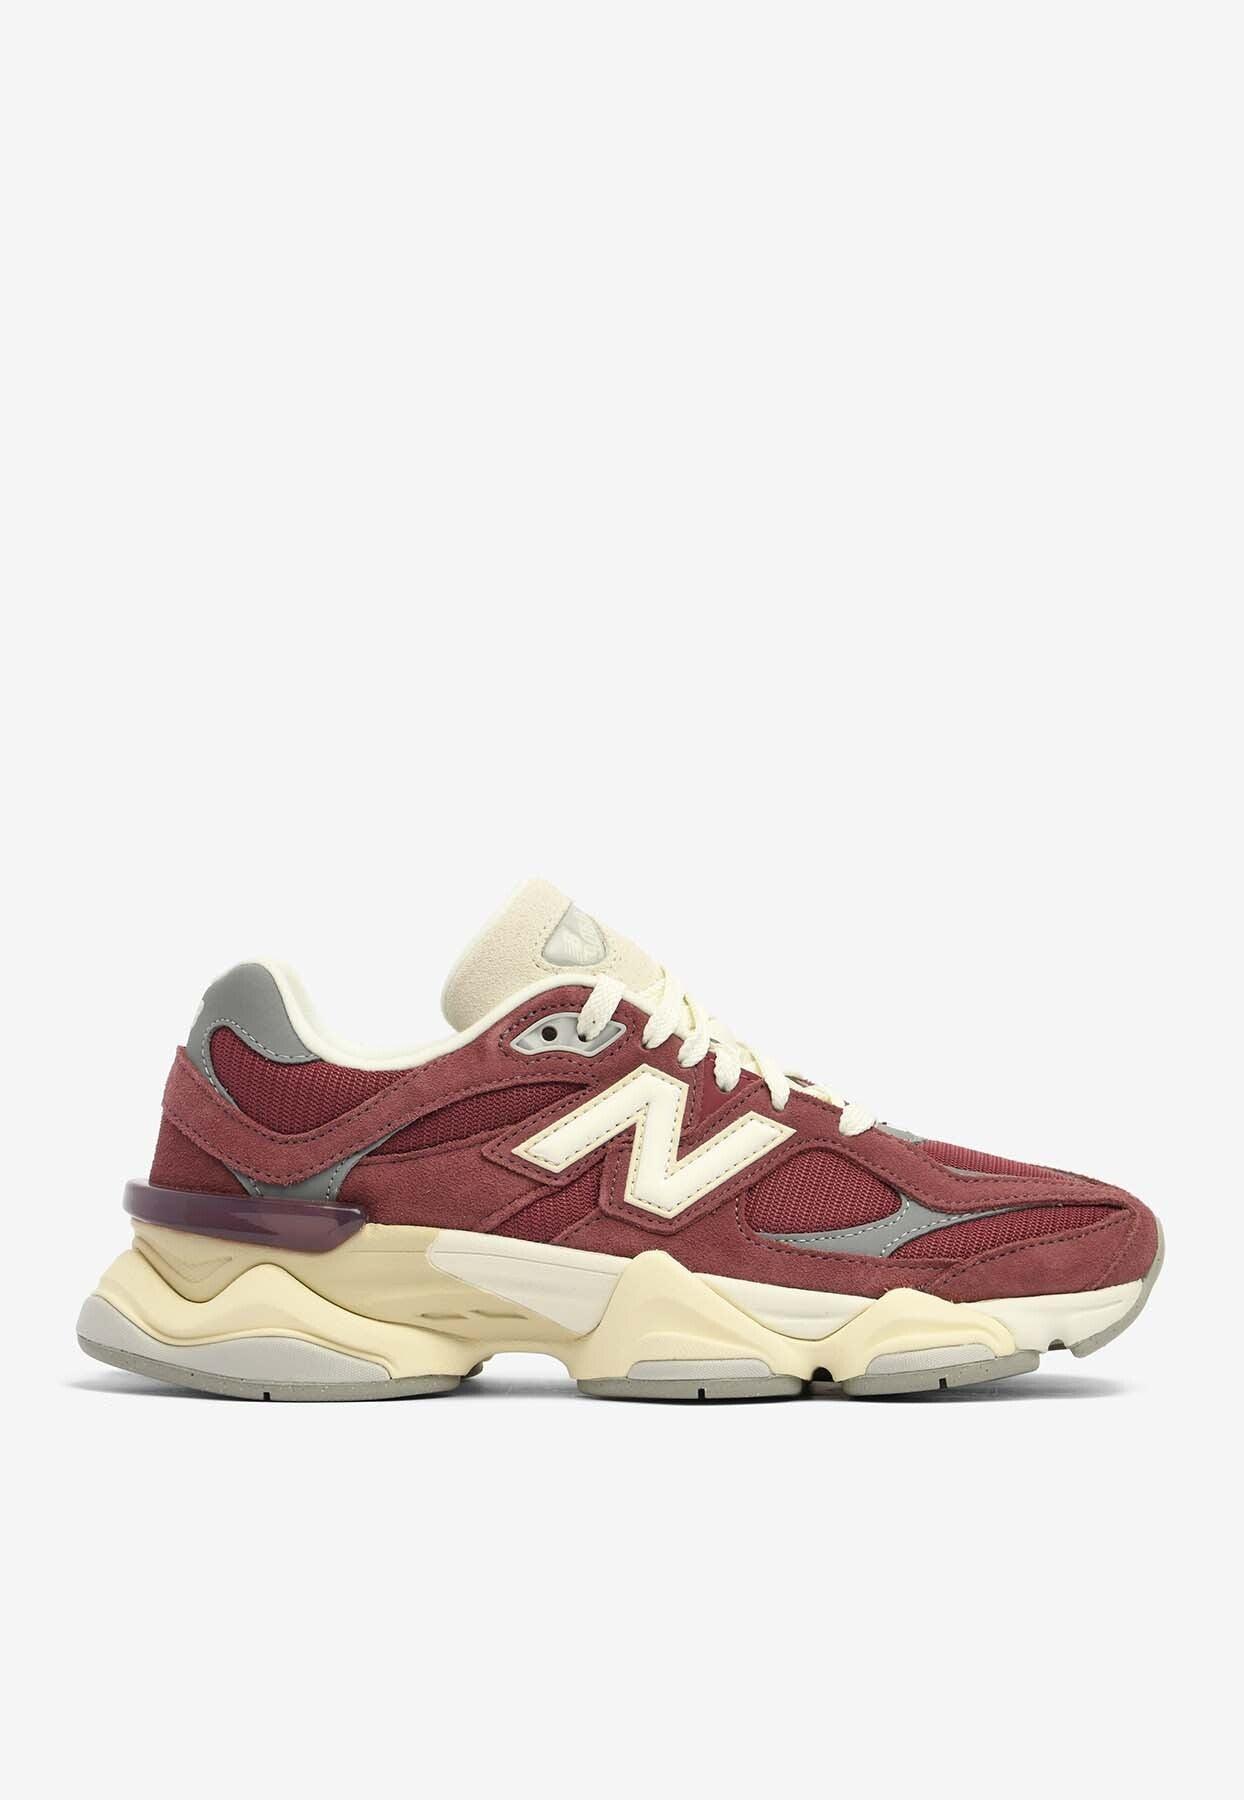 New Balance 9060 Low-top Sneakers In Washed Burgundy in Red | Lyst